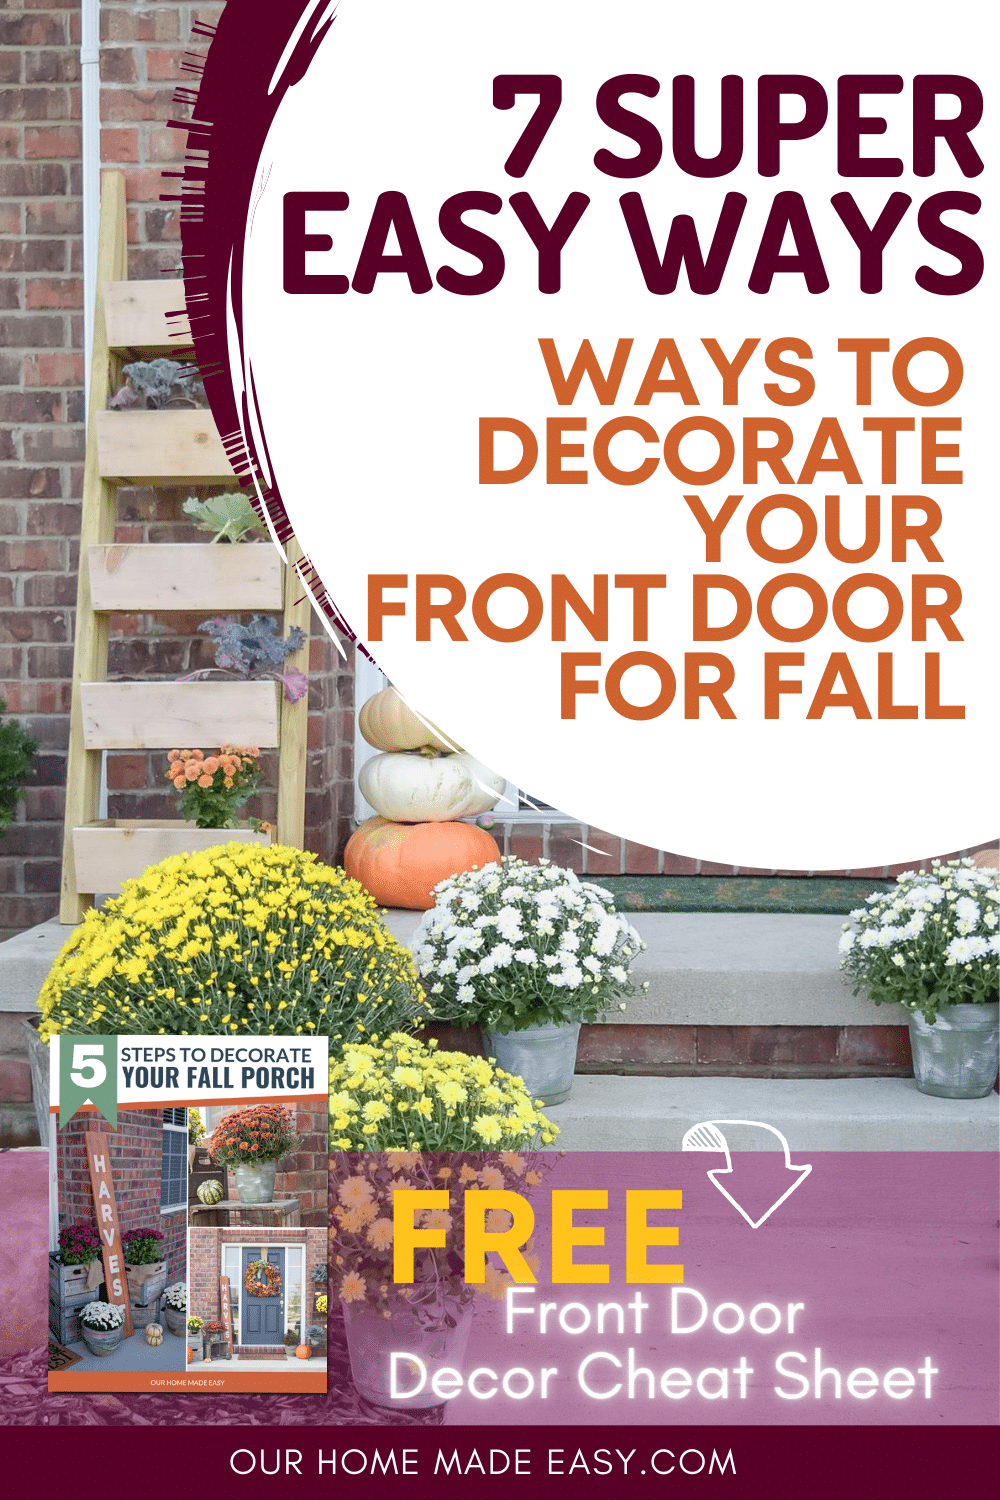 Make your home feel welcoming with these super simple Fall front door ideas! No worries about if you don't have a full porch, these ideas will make your front door look amazing no matter what your style is!!